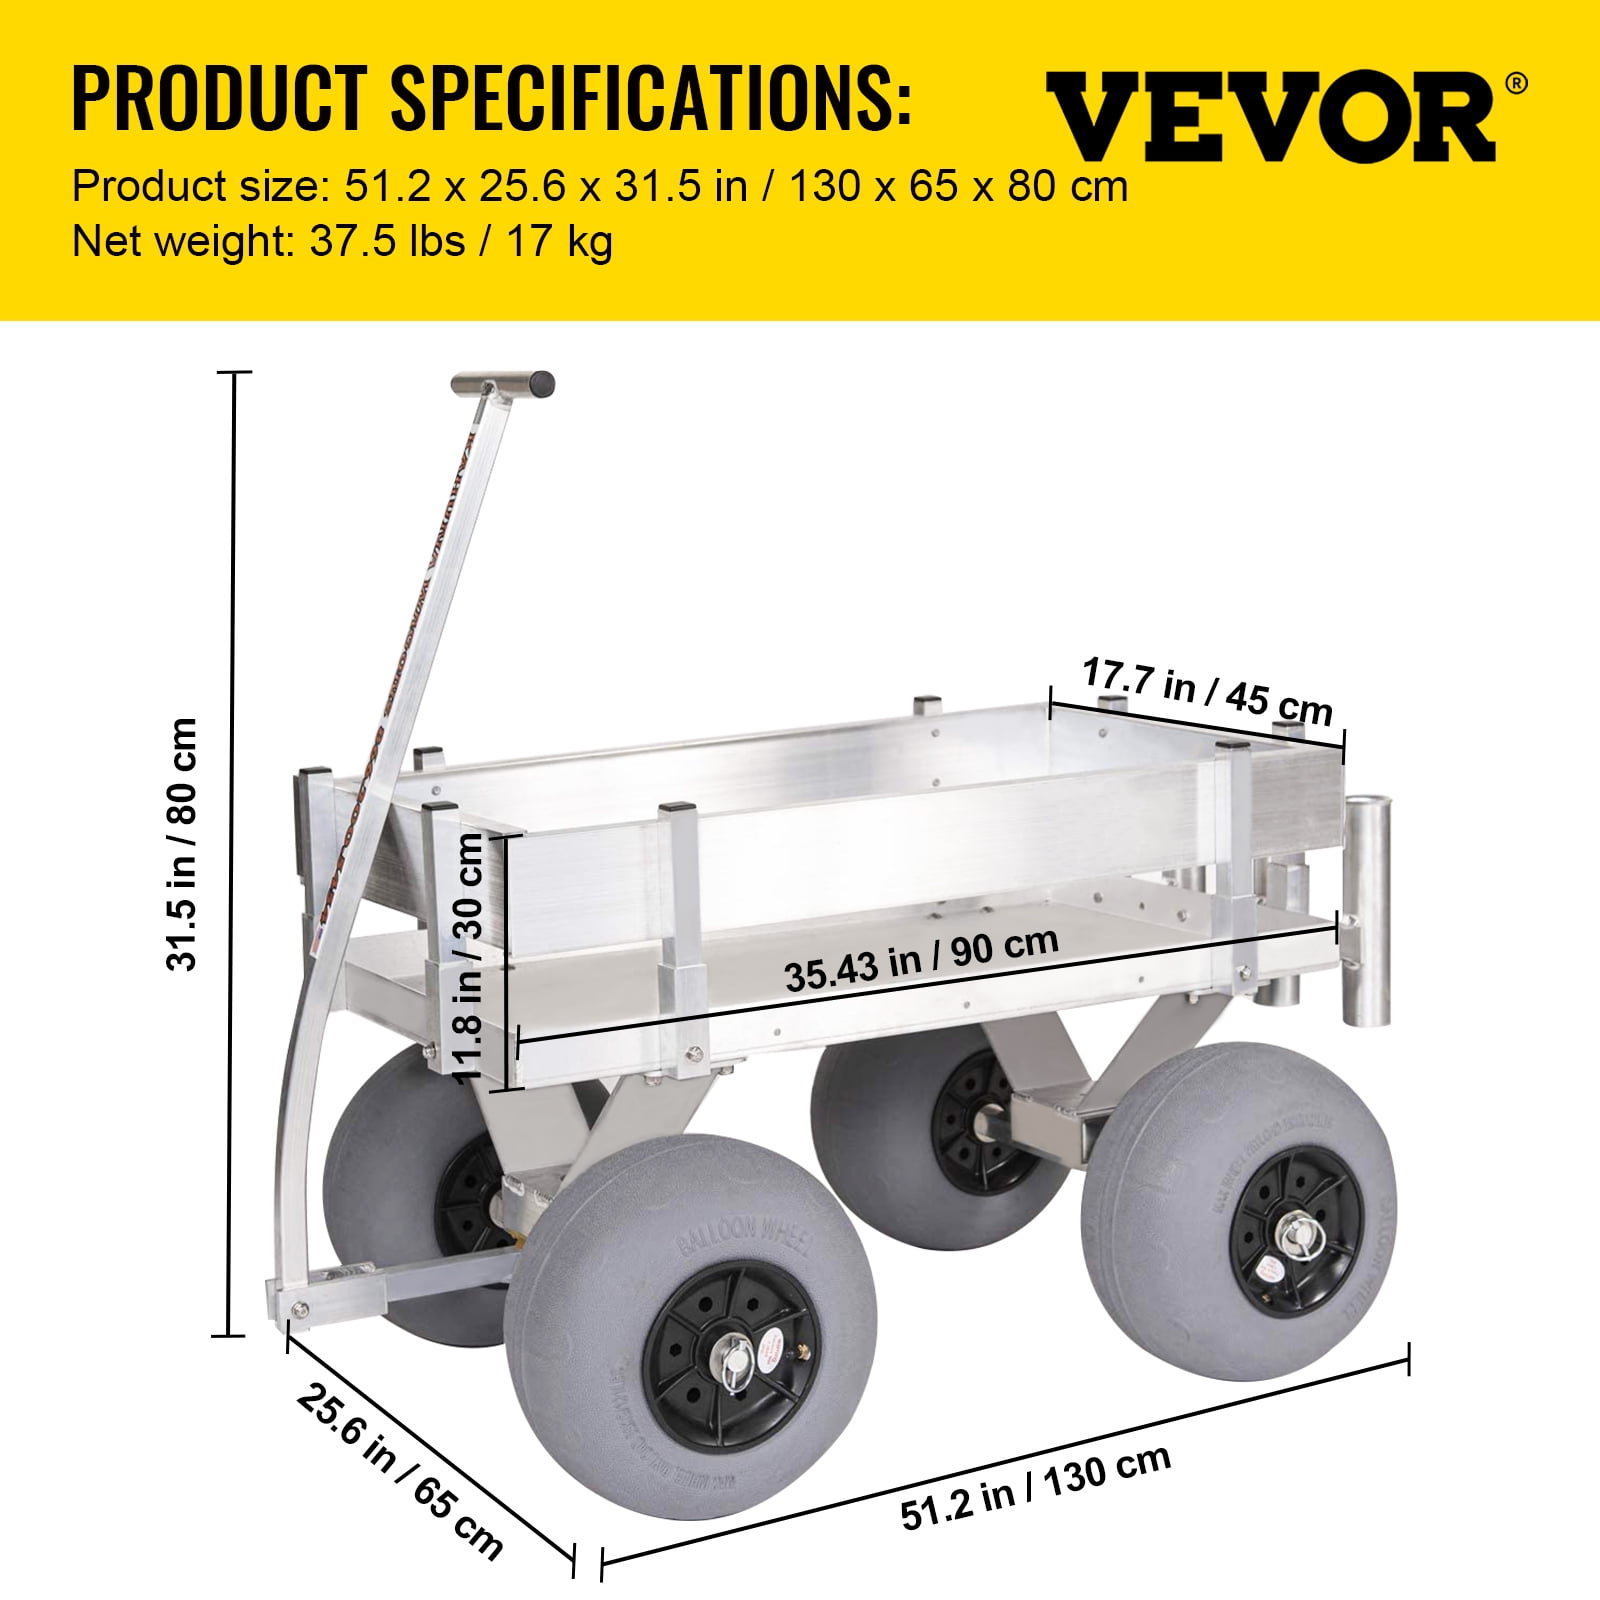 VEVOR Beach Fishing Cart, 34.5 x 23.6 x 25.5 inch Fish and Marine Carts w/  330lbs Load Capacity, with Big Wheels Balloon Tires for Sand, Heavy-Duty  Aluminum Wagon-Rod Holders and Trolley, no Rust 